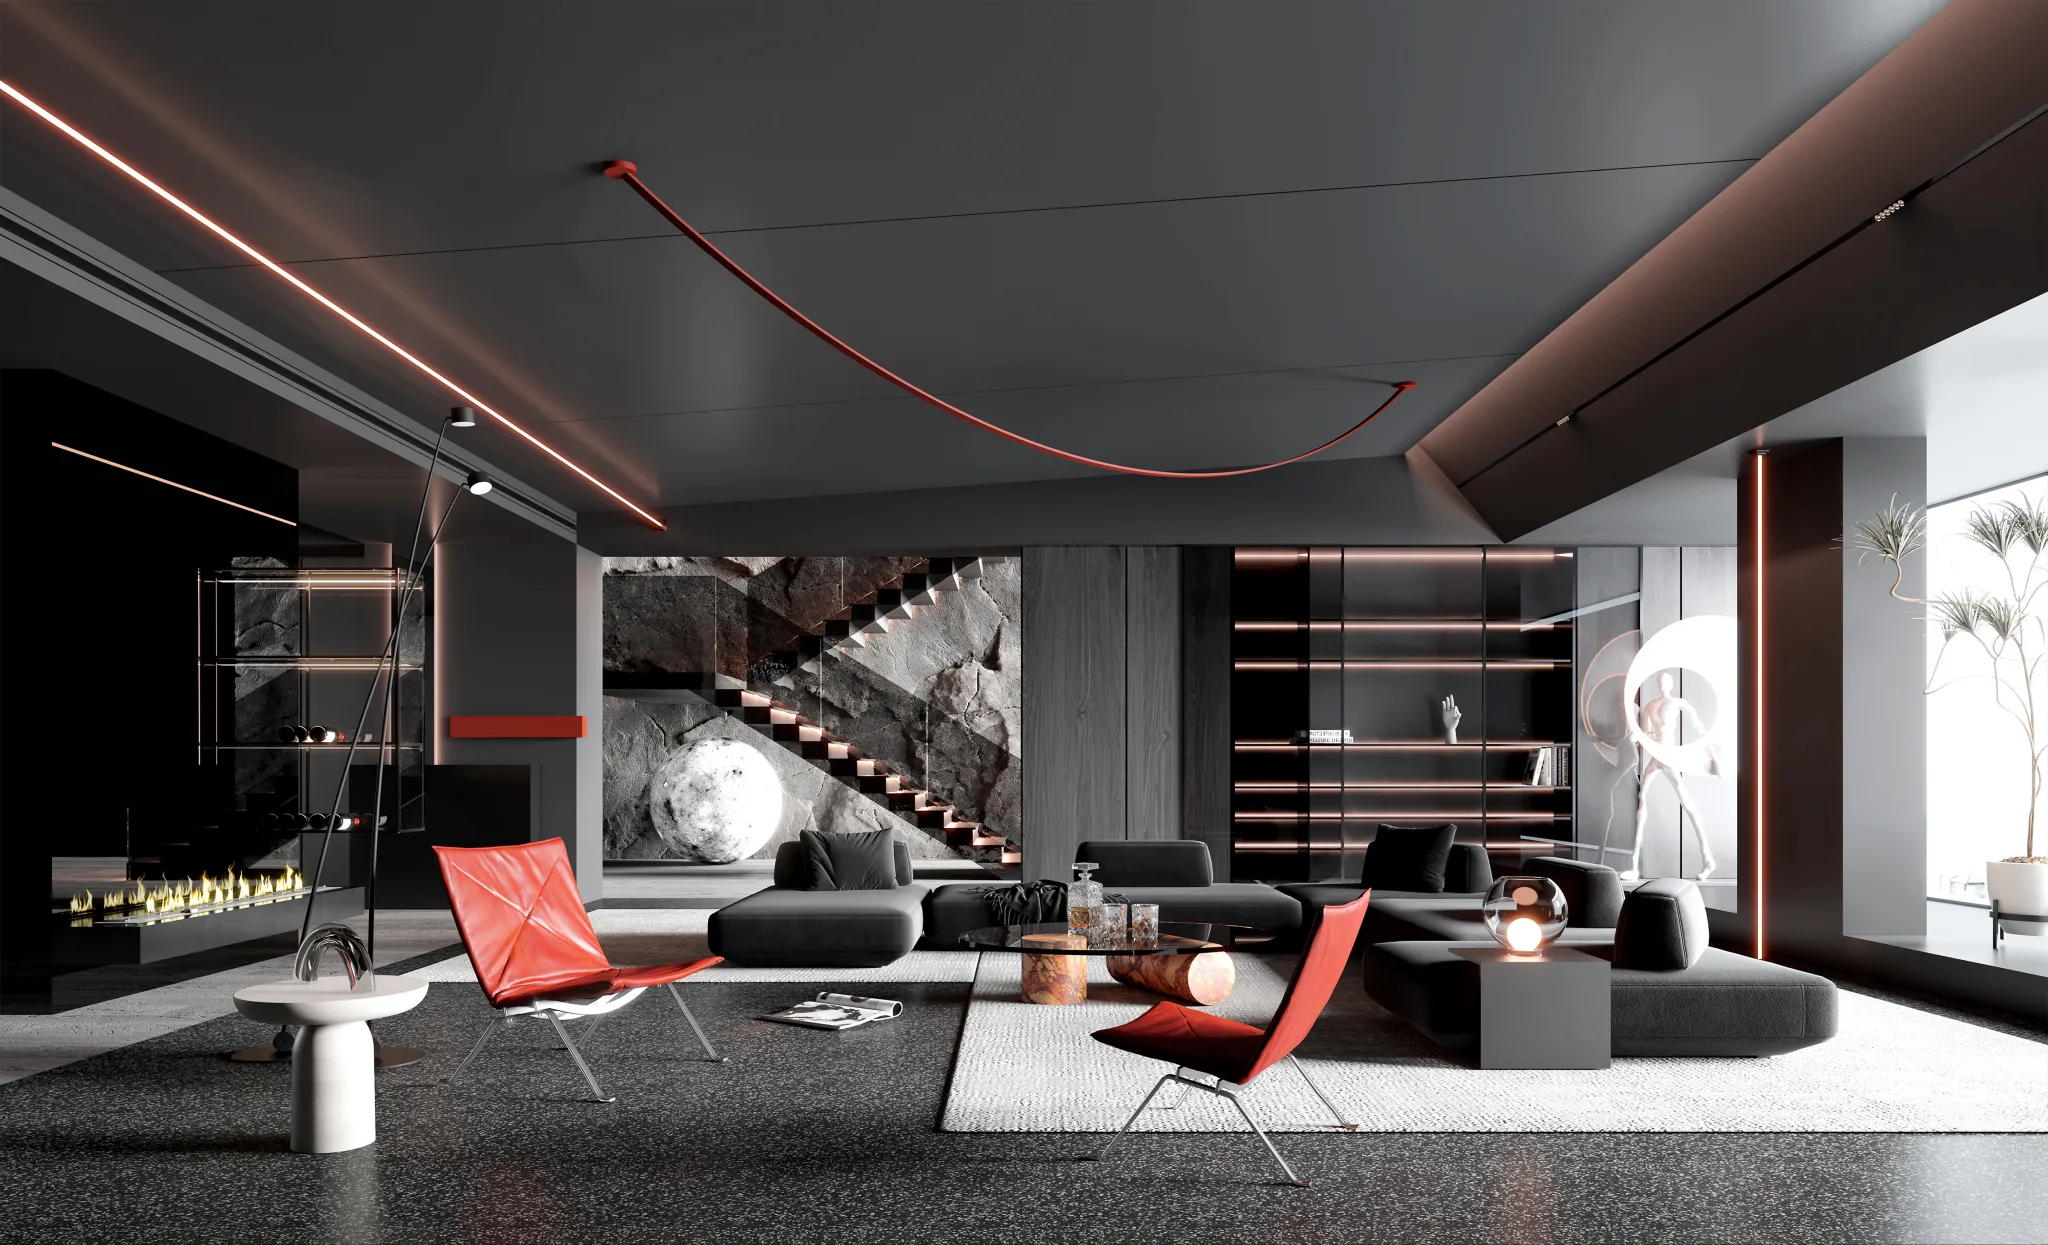 HOUSE SPACE 3D SCENES – LIVING ROOM – 0035